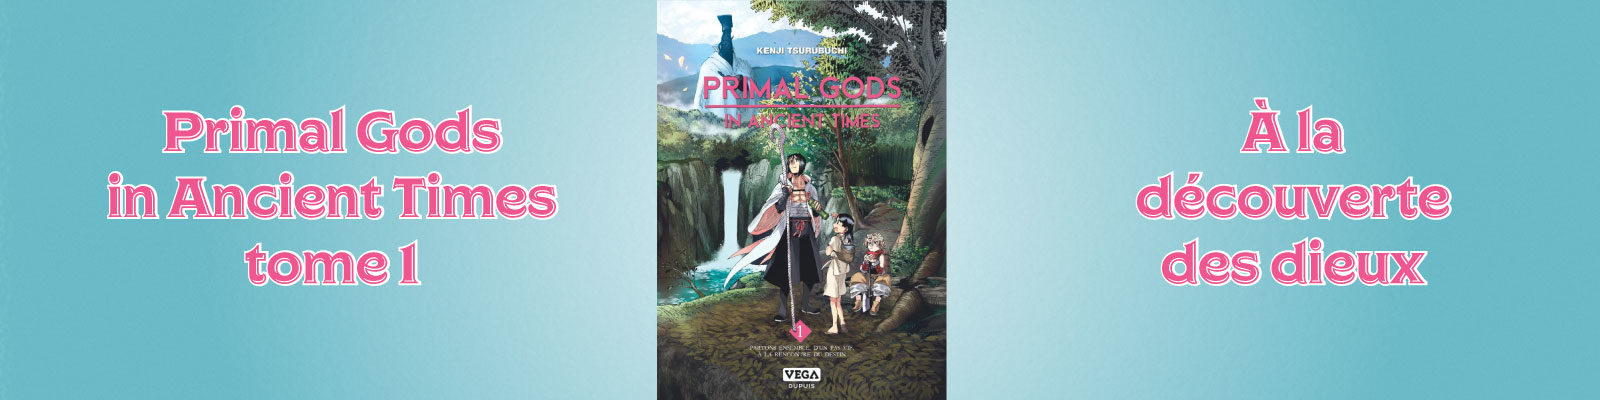 Primal Gods in Ancient Times-T1-2